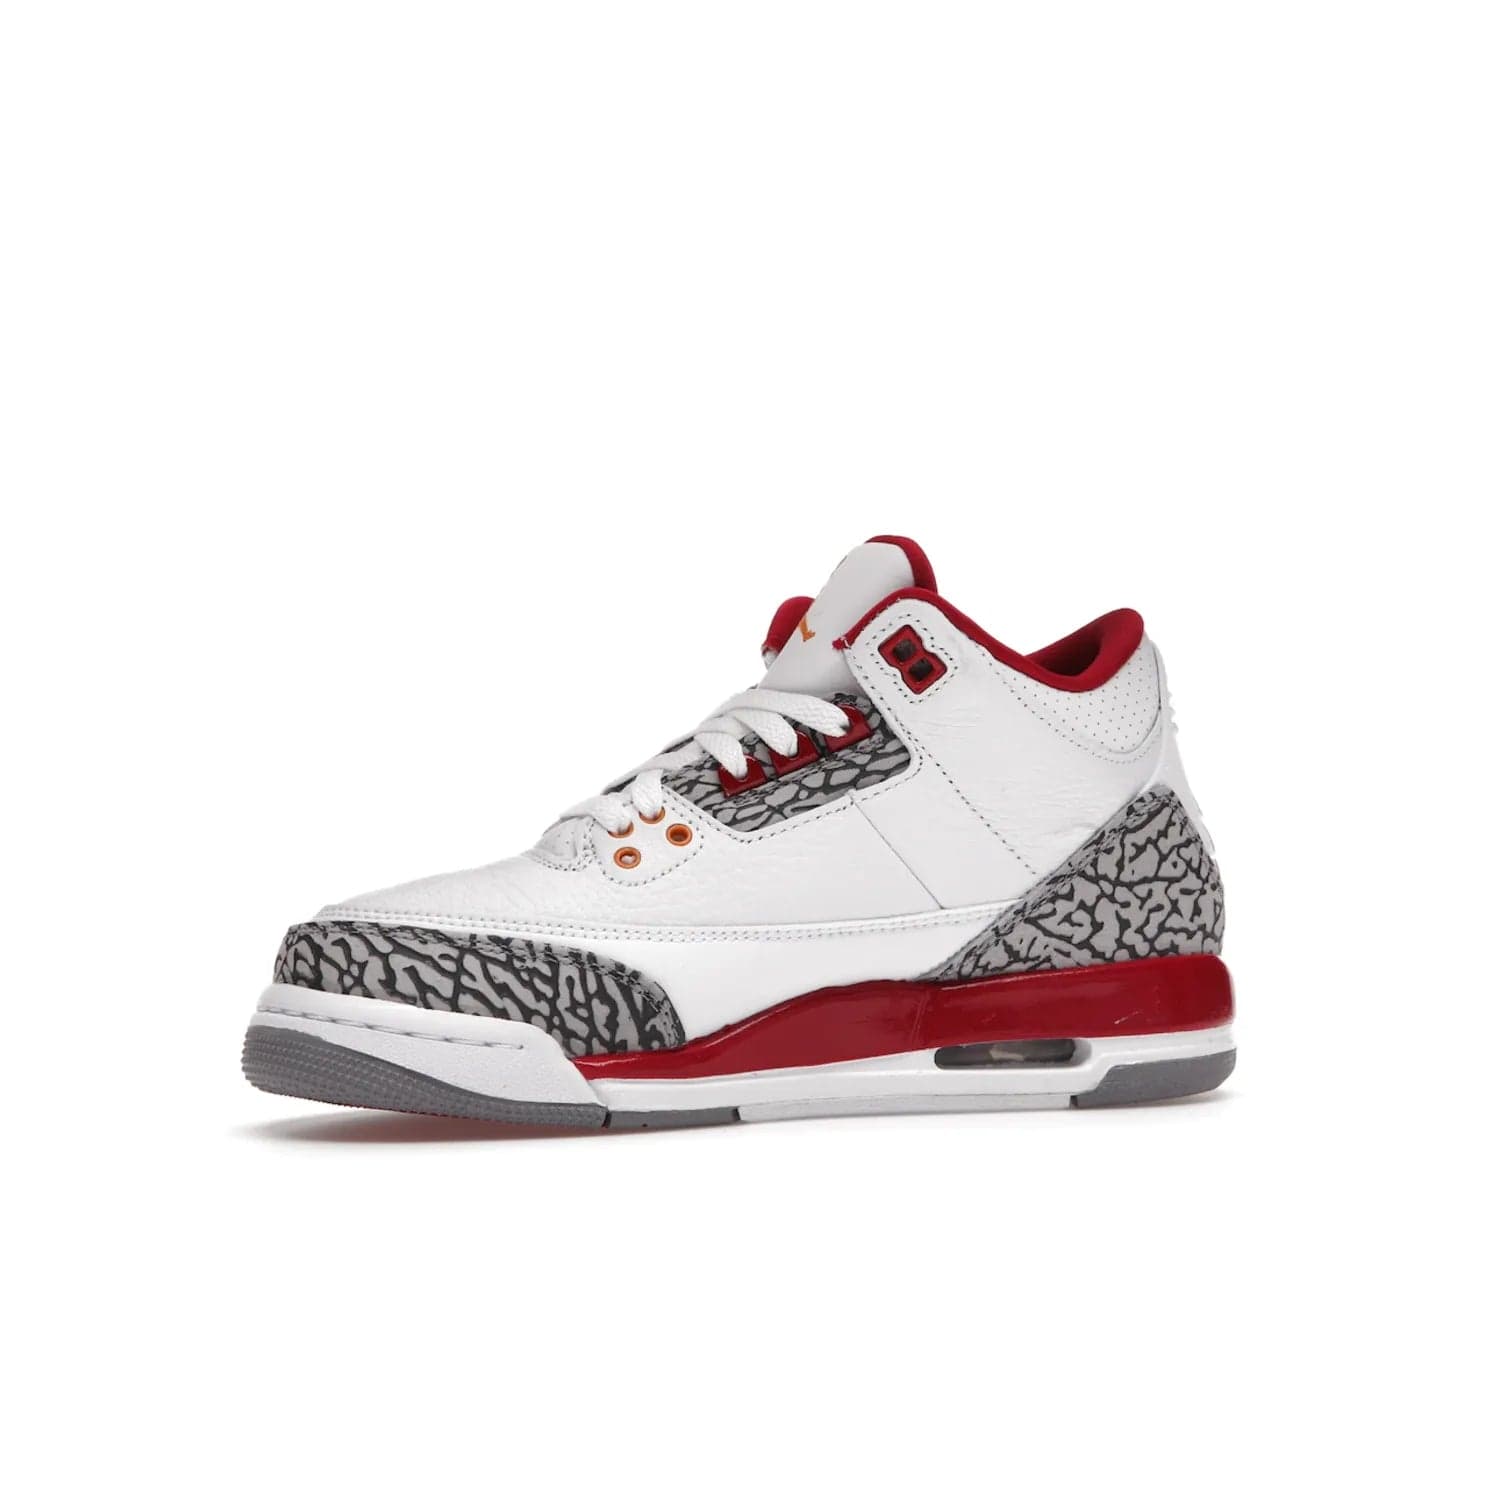 Jordan 3 Retro Cardinal (GS) - Image 17 - Only at www.BallersClubKickz.com - Shop the kid-sized Air Jordan 3 Retro Cardinal GS, released Feb 2022. White tumbled leather upper, light curry accenting, cement grey and classic red details throughout. Visible Air cushioning, midsole, and an eye-catching outsole. Show off your style with this fashionable streetwear silhouette.